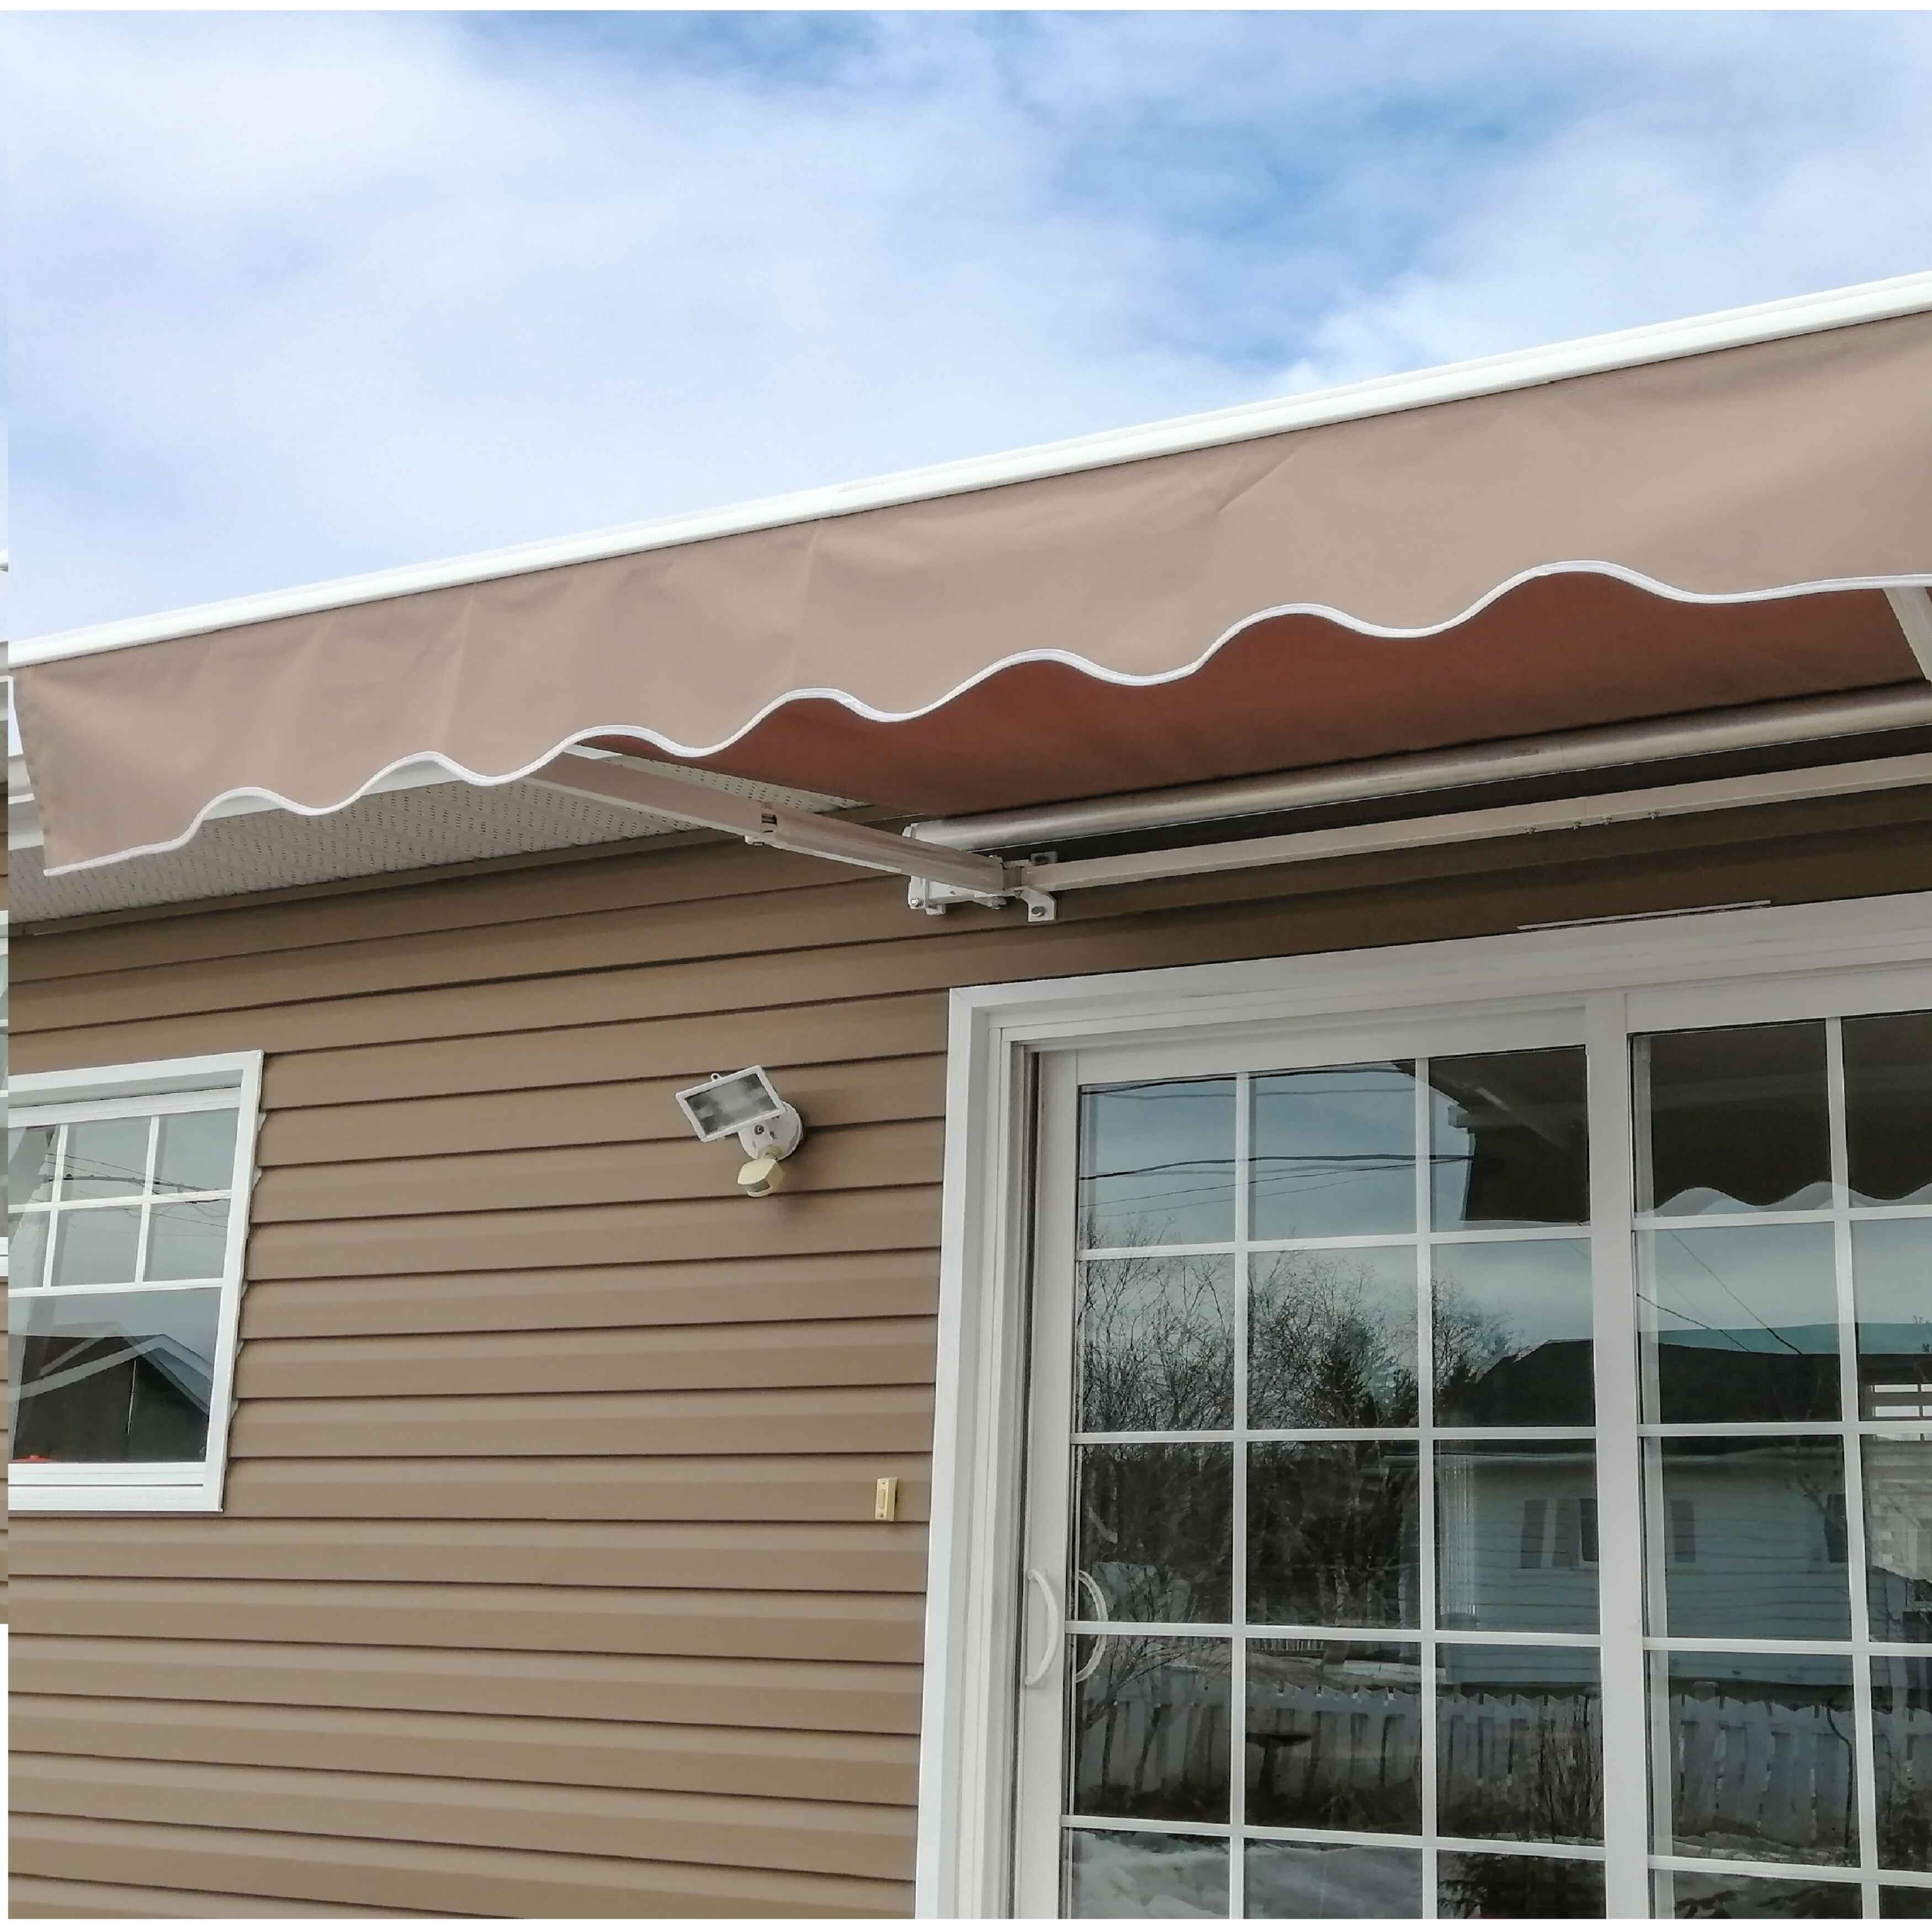 ALEKO 20' x 10' Retractable Motorized Patio Awning, Sand Color - image 4 of 14